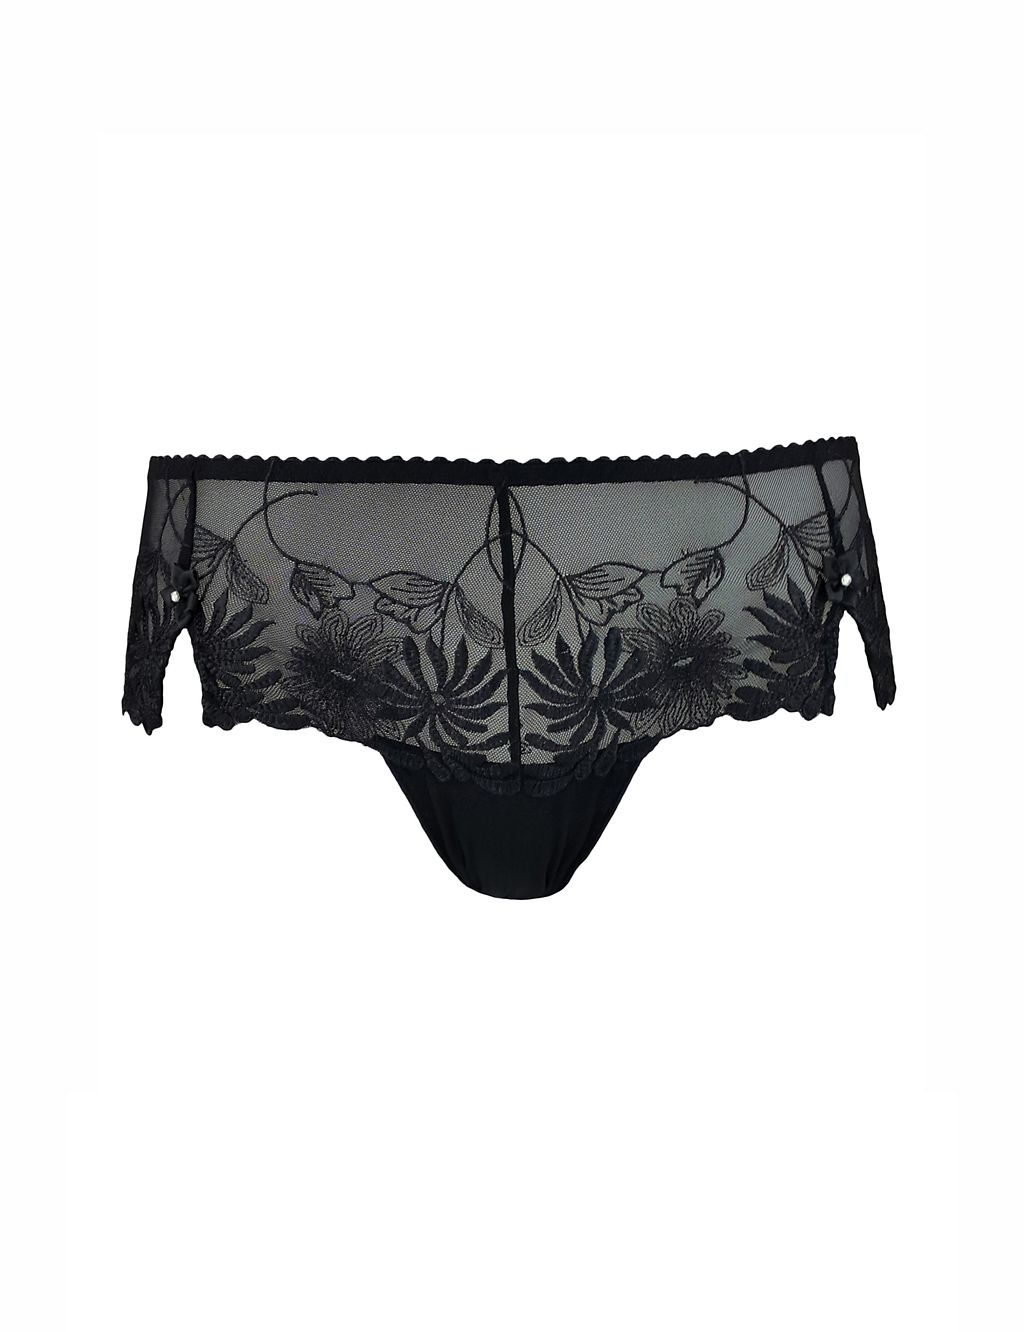 St Tropez French Knickers | Pour Moi | M&S